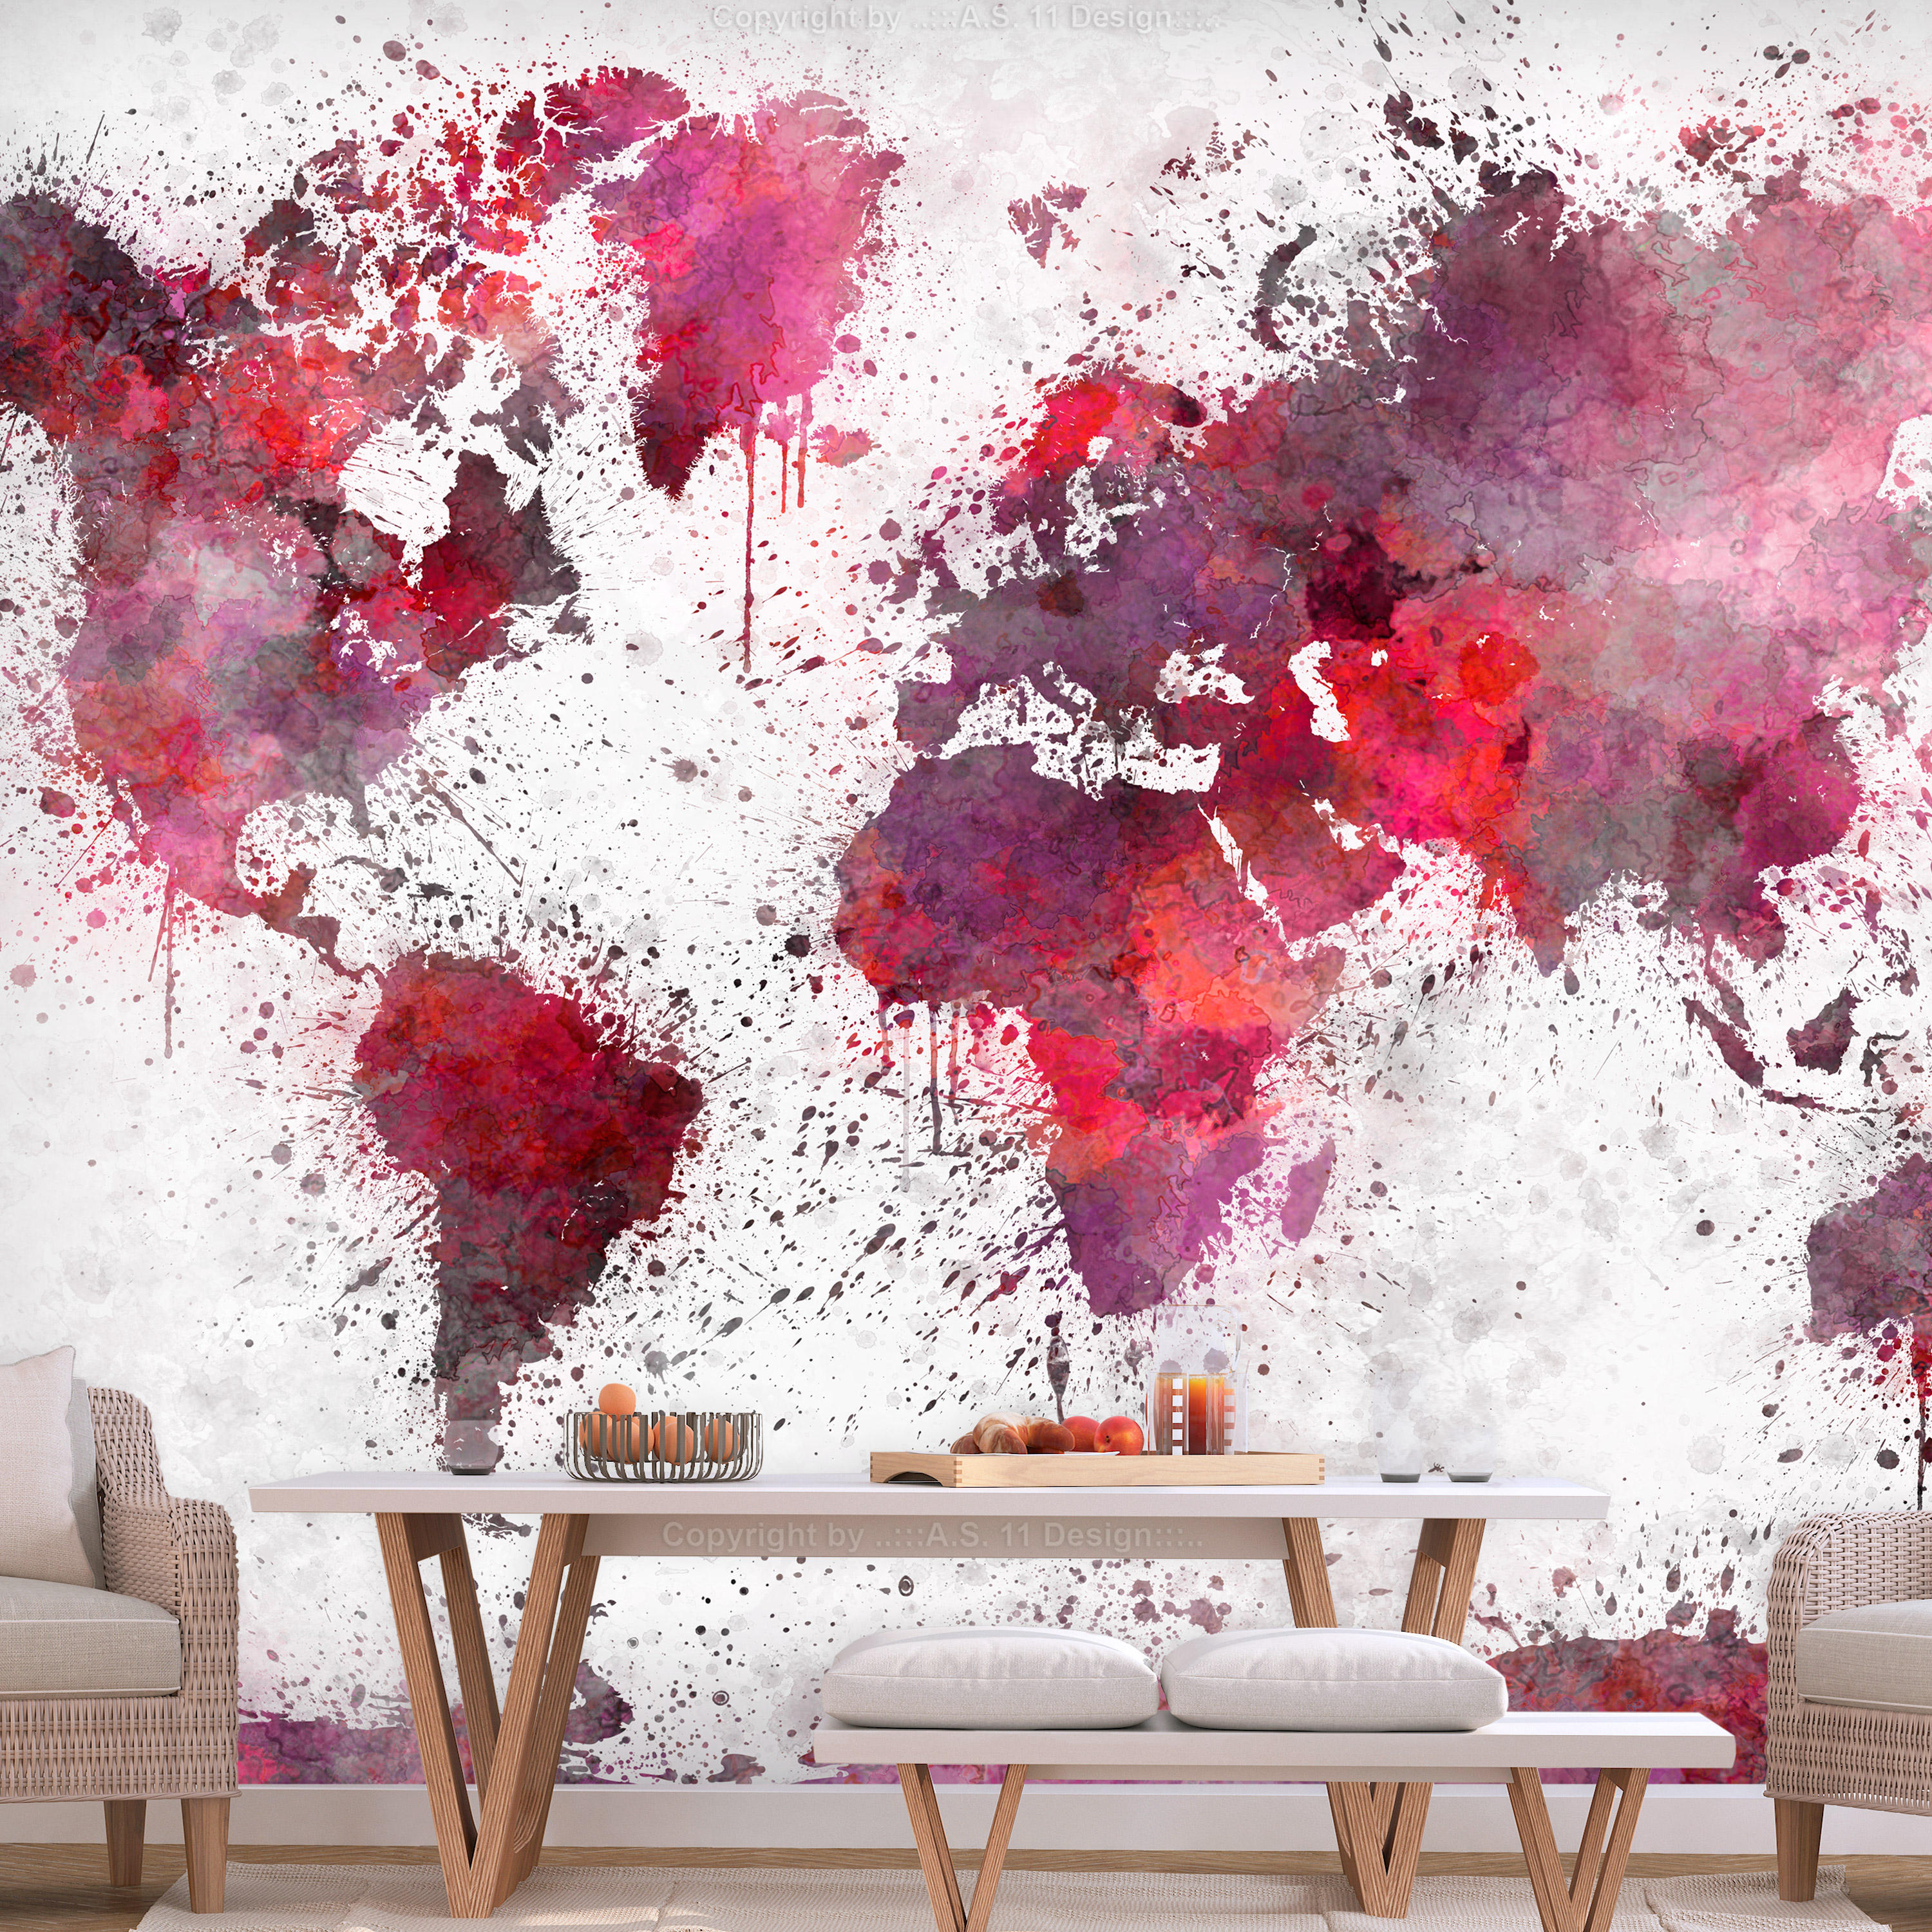 Wallpaper - World Map: Red Watercolors - 400x280